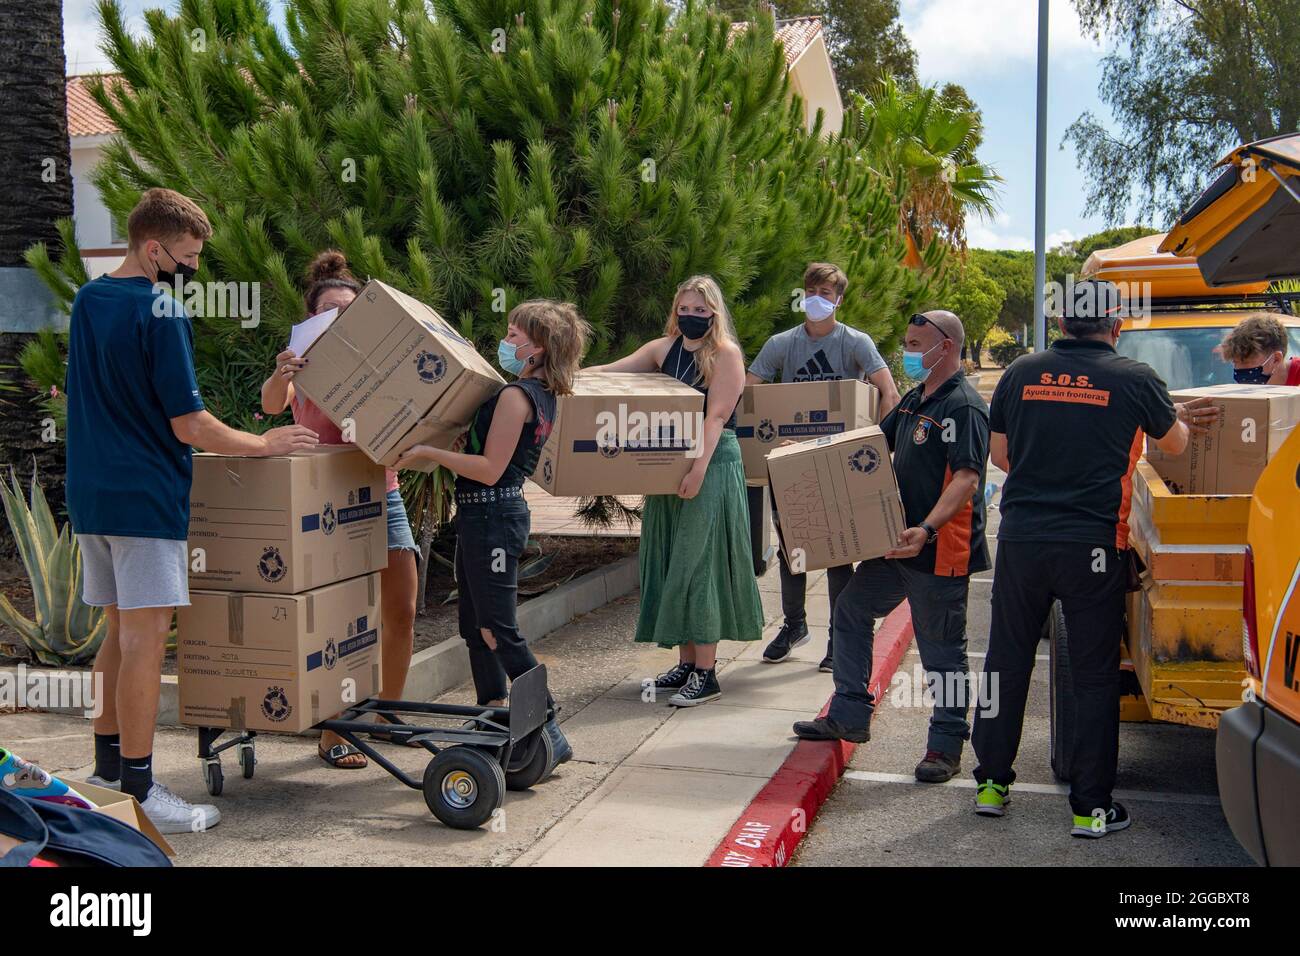 Rota, Spain. 29th Aug, 2021. Volunteers move boxed donations for Operations Allies Refuge to support Afghan refugees evacuated from Kabul August 29, 2021 in Rota, Spain. NAS Rota is providing temporary lodging for evacuees from Afghanistan as part of Operation Allies Refuge. Credit: Planetpix/Alamy Live News Stock Photo